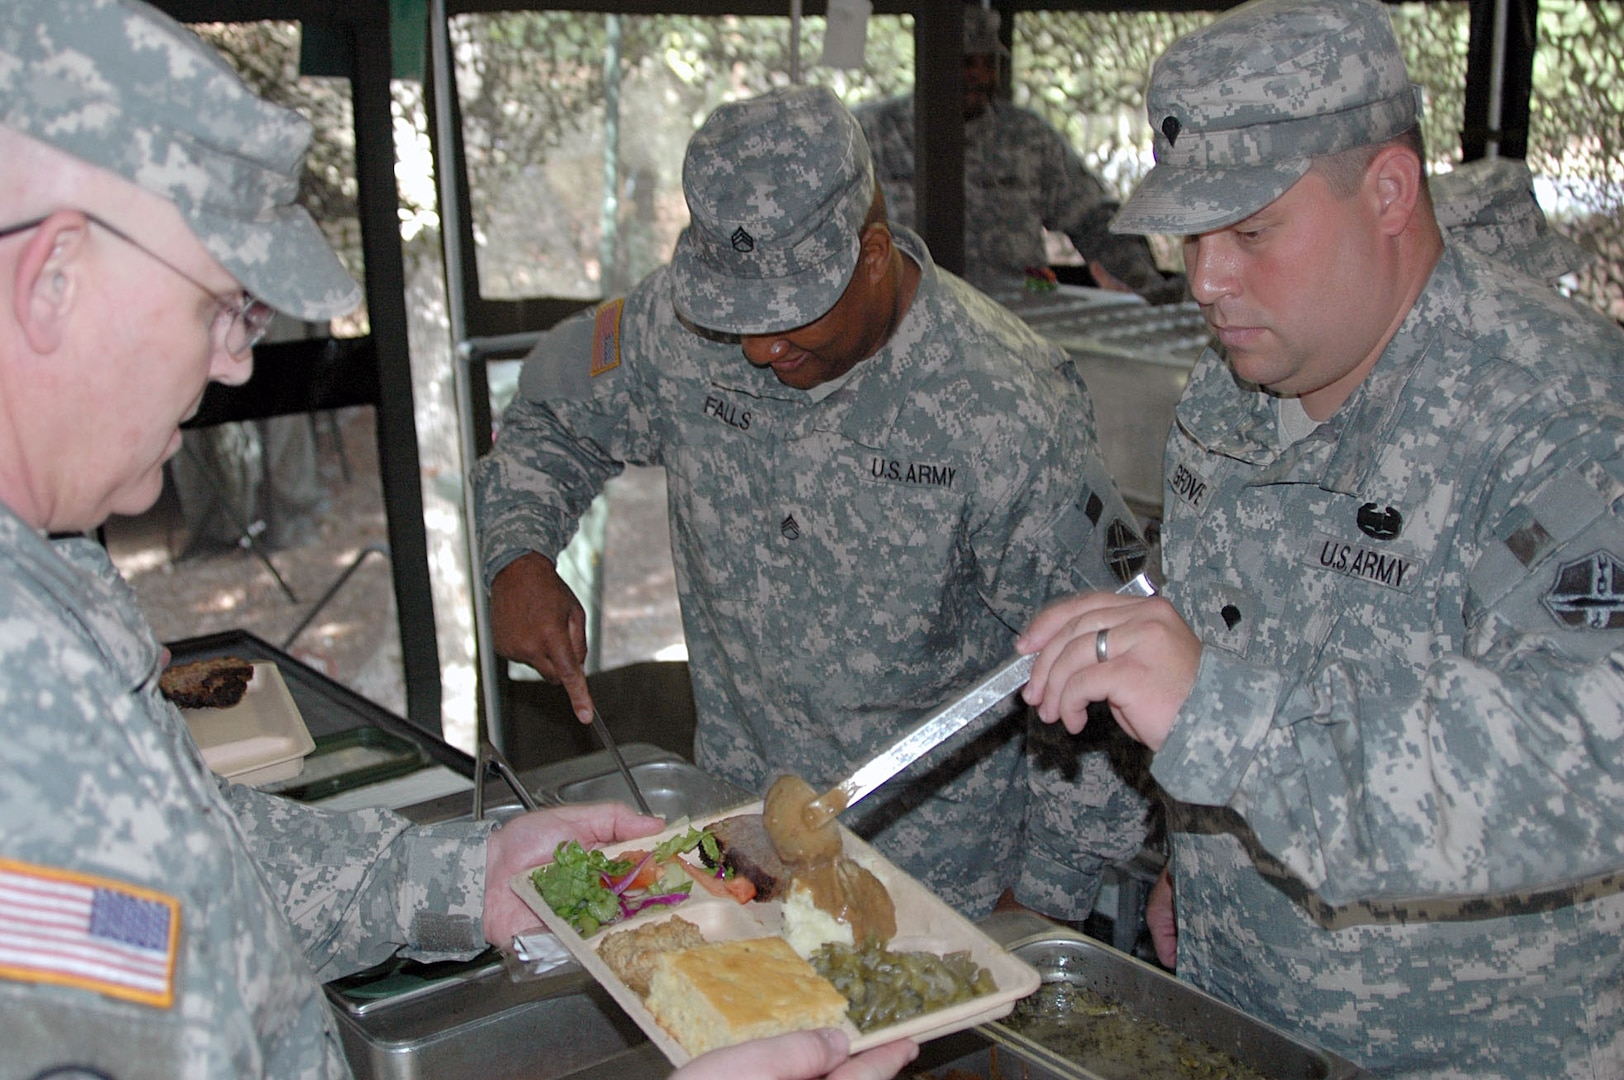 Army Staff Sgt. Joey K. Falls (left) and Spc. Seth Grove (right) of the Virginia National Guard's 1032nd Transportation Company serve 1st Sgt. Ernest T. Miller out of a mobile kitchen trailer. The mobile kitchen trailer was set up as a requirement of the Connelly Competition for which they were competing.